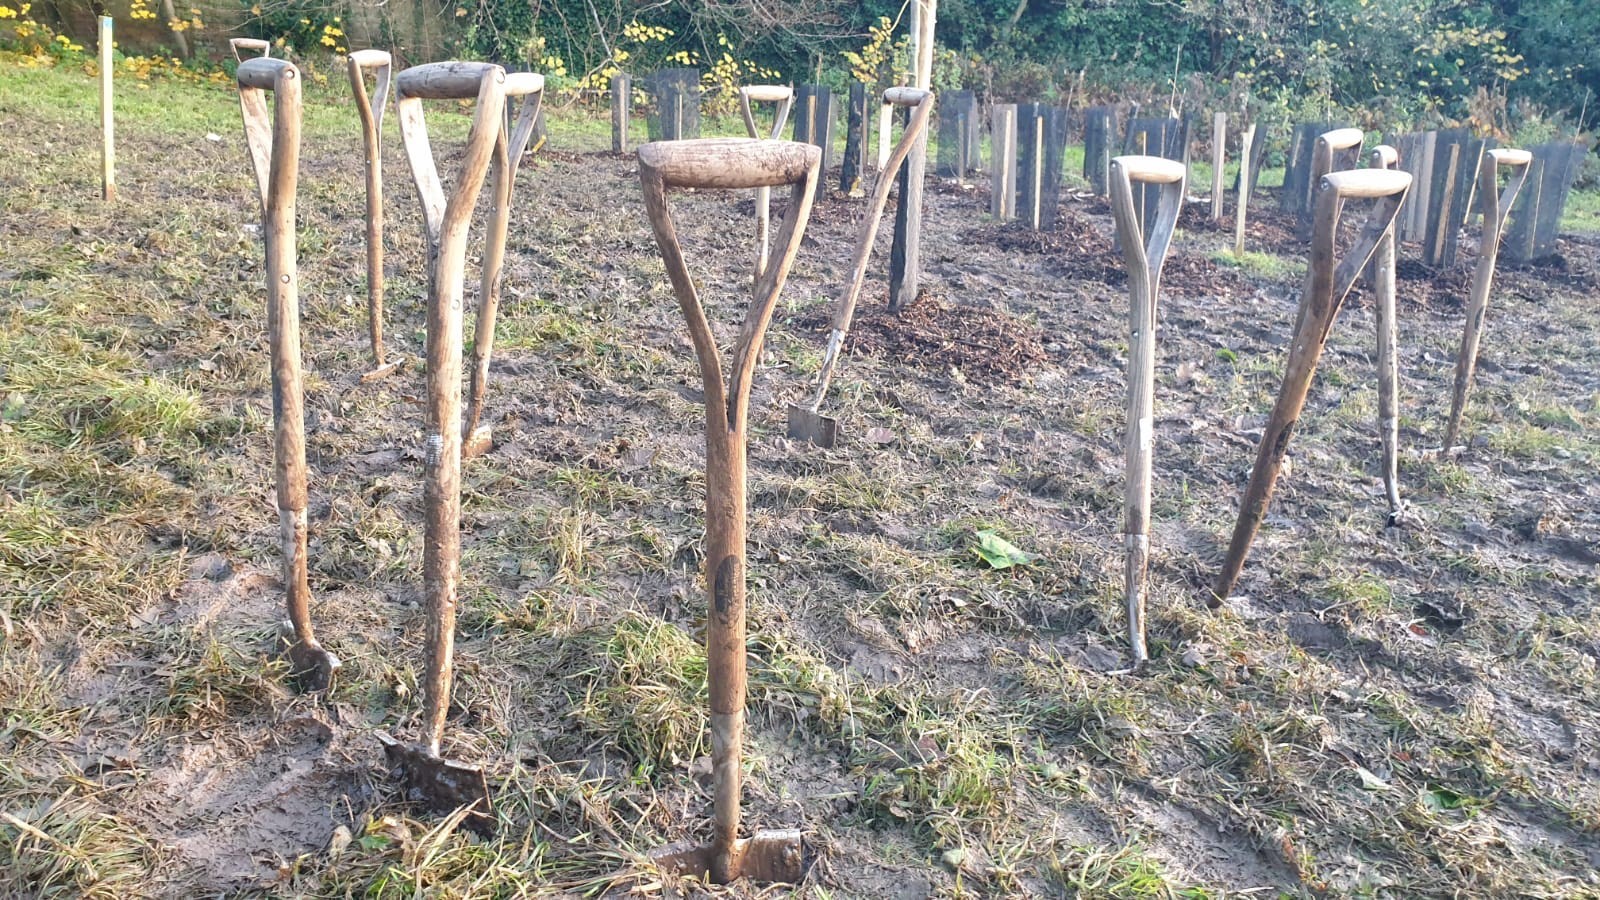 Wooden handles of spades stand out of the soil.